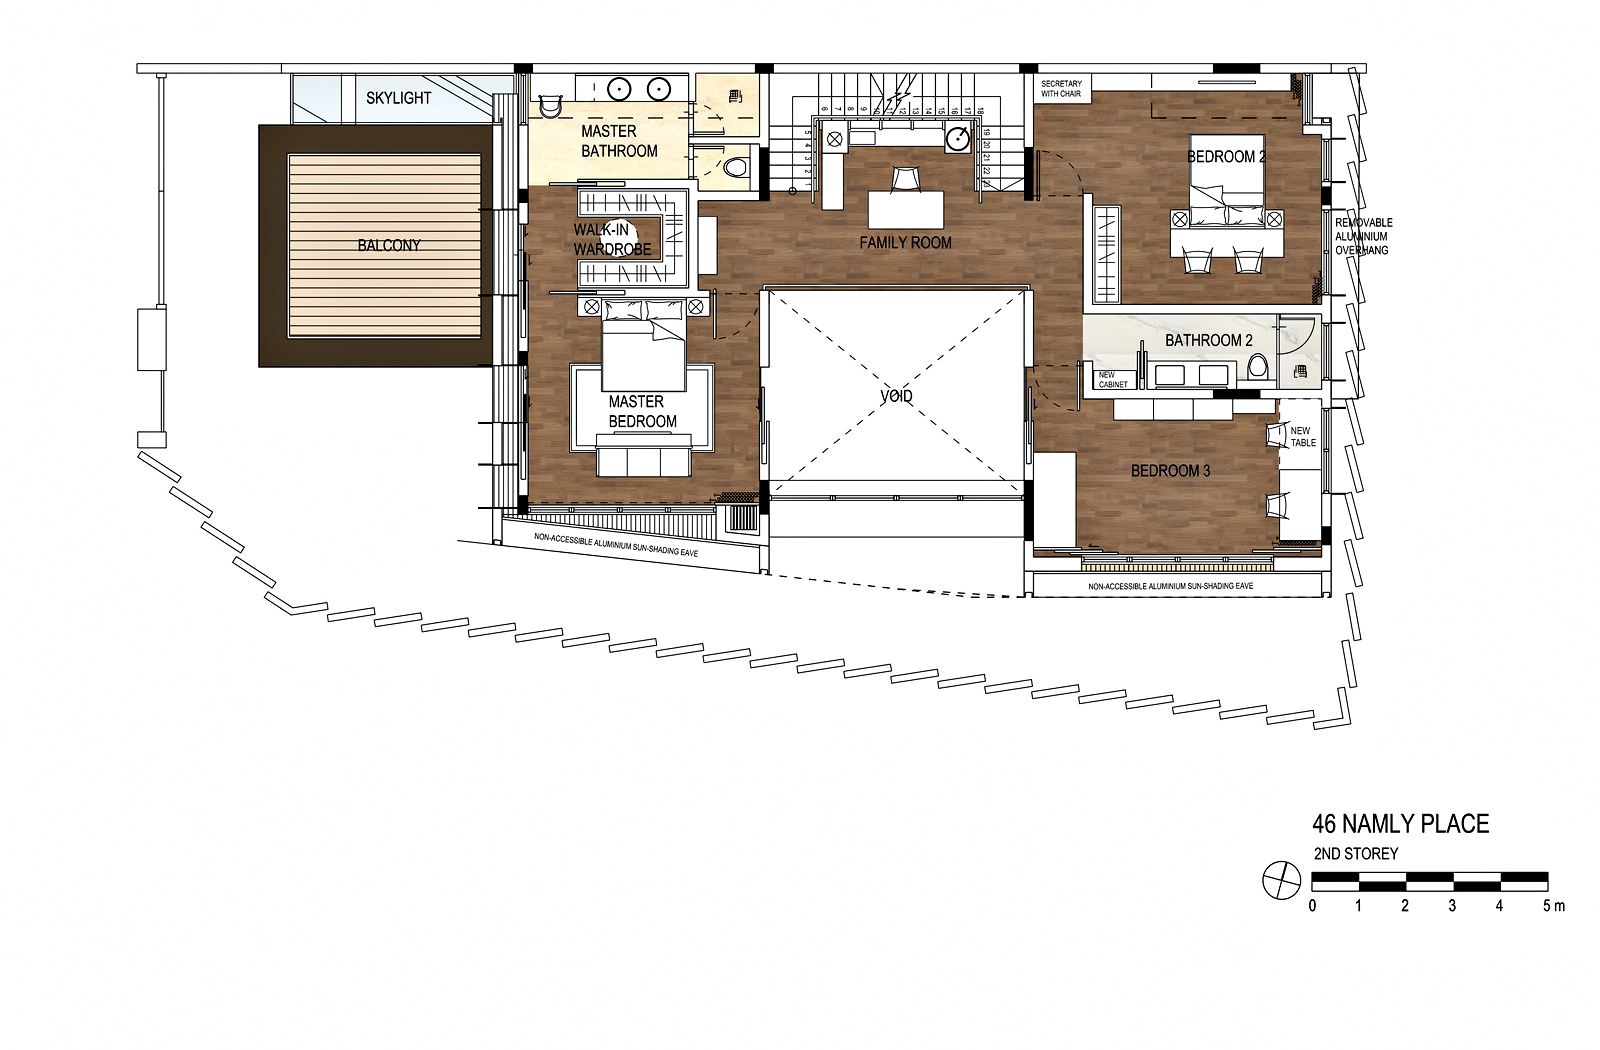 Second Floor Plan – The Loft House Luxury Residence – Namly Place, Singapore